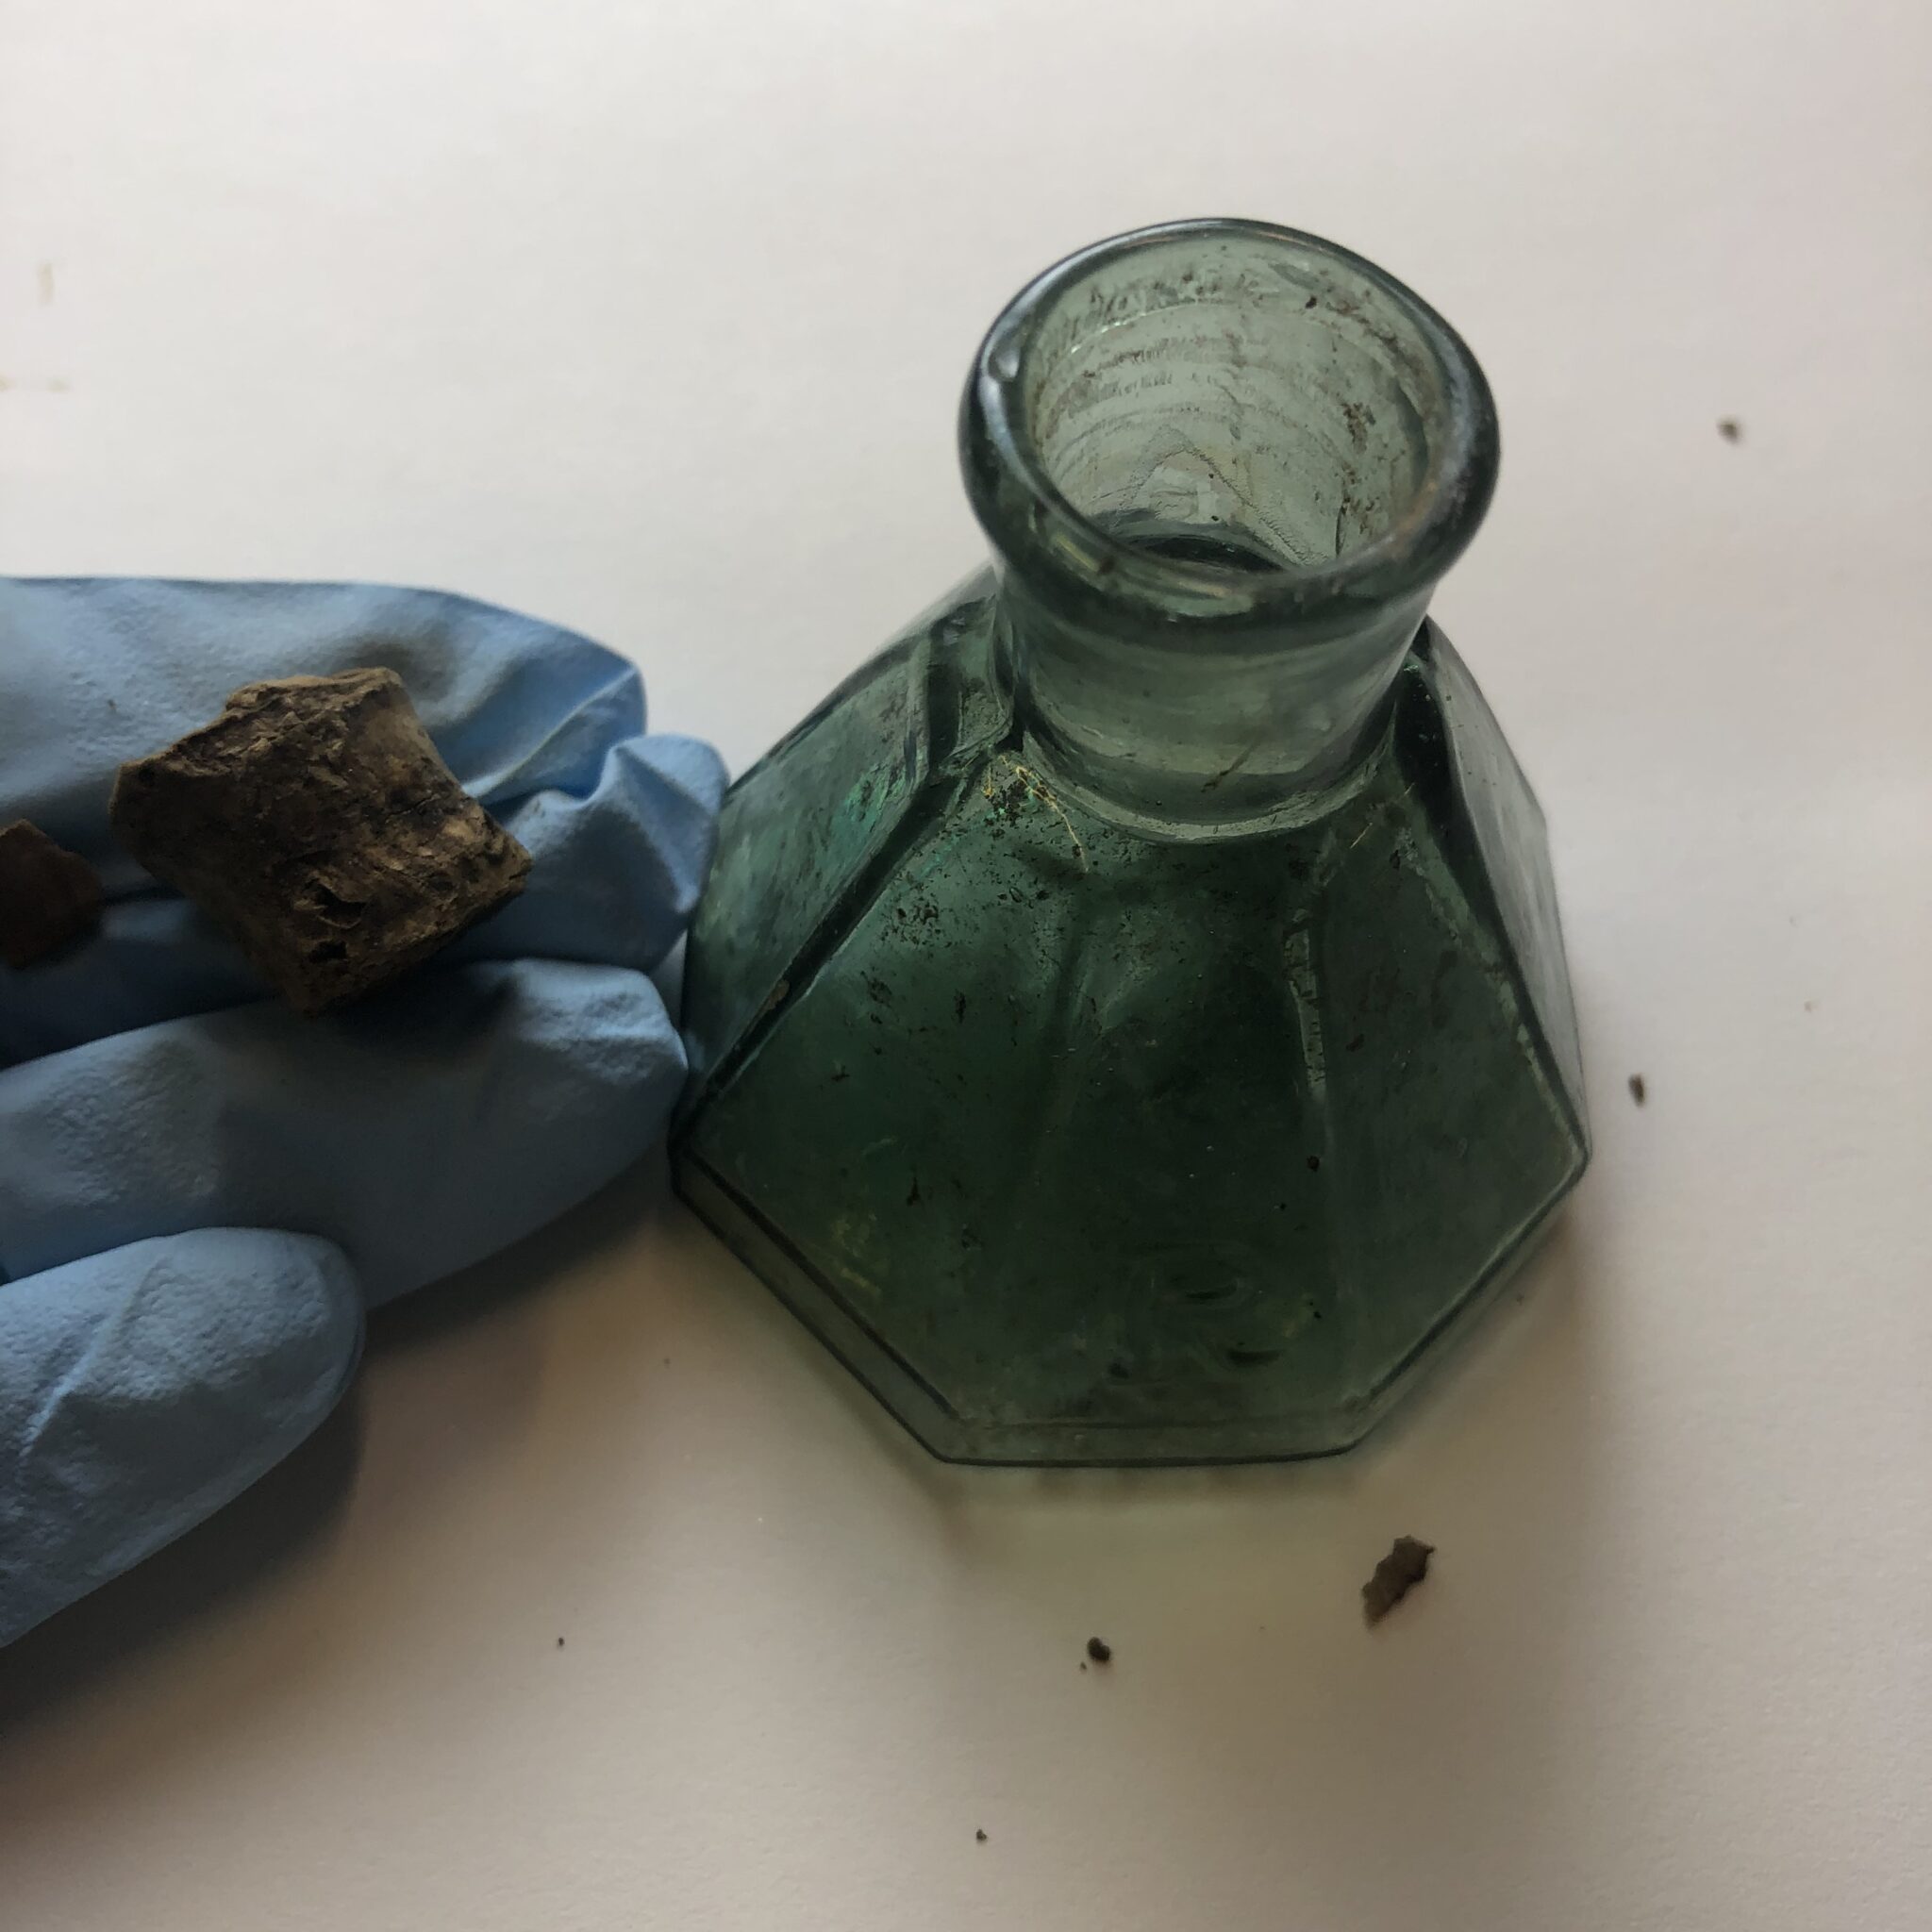 Recent Acquisition: 1860s-1880s Ink and Mucilage Bottles